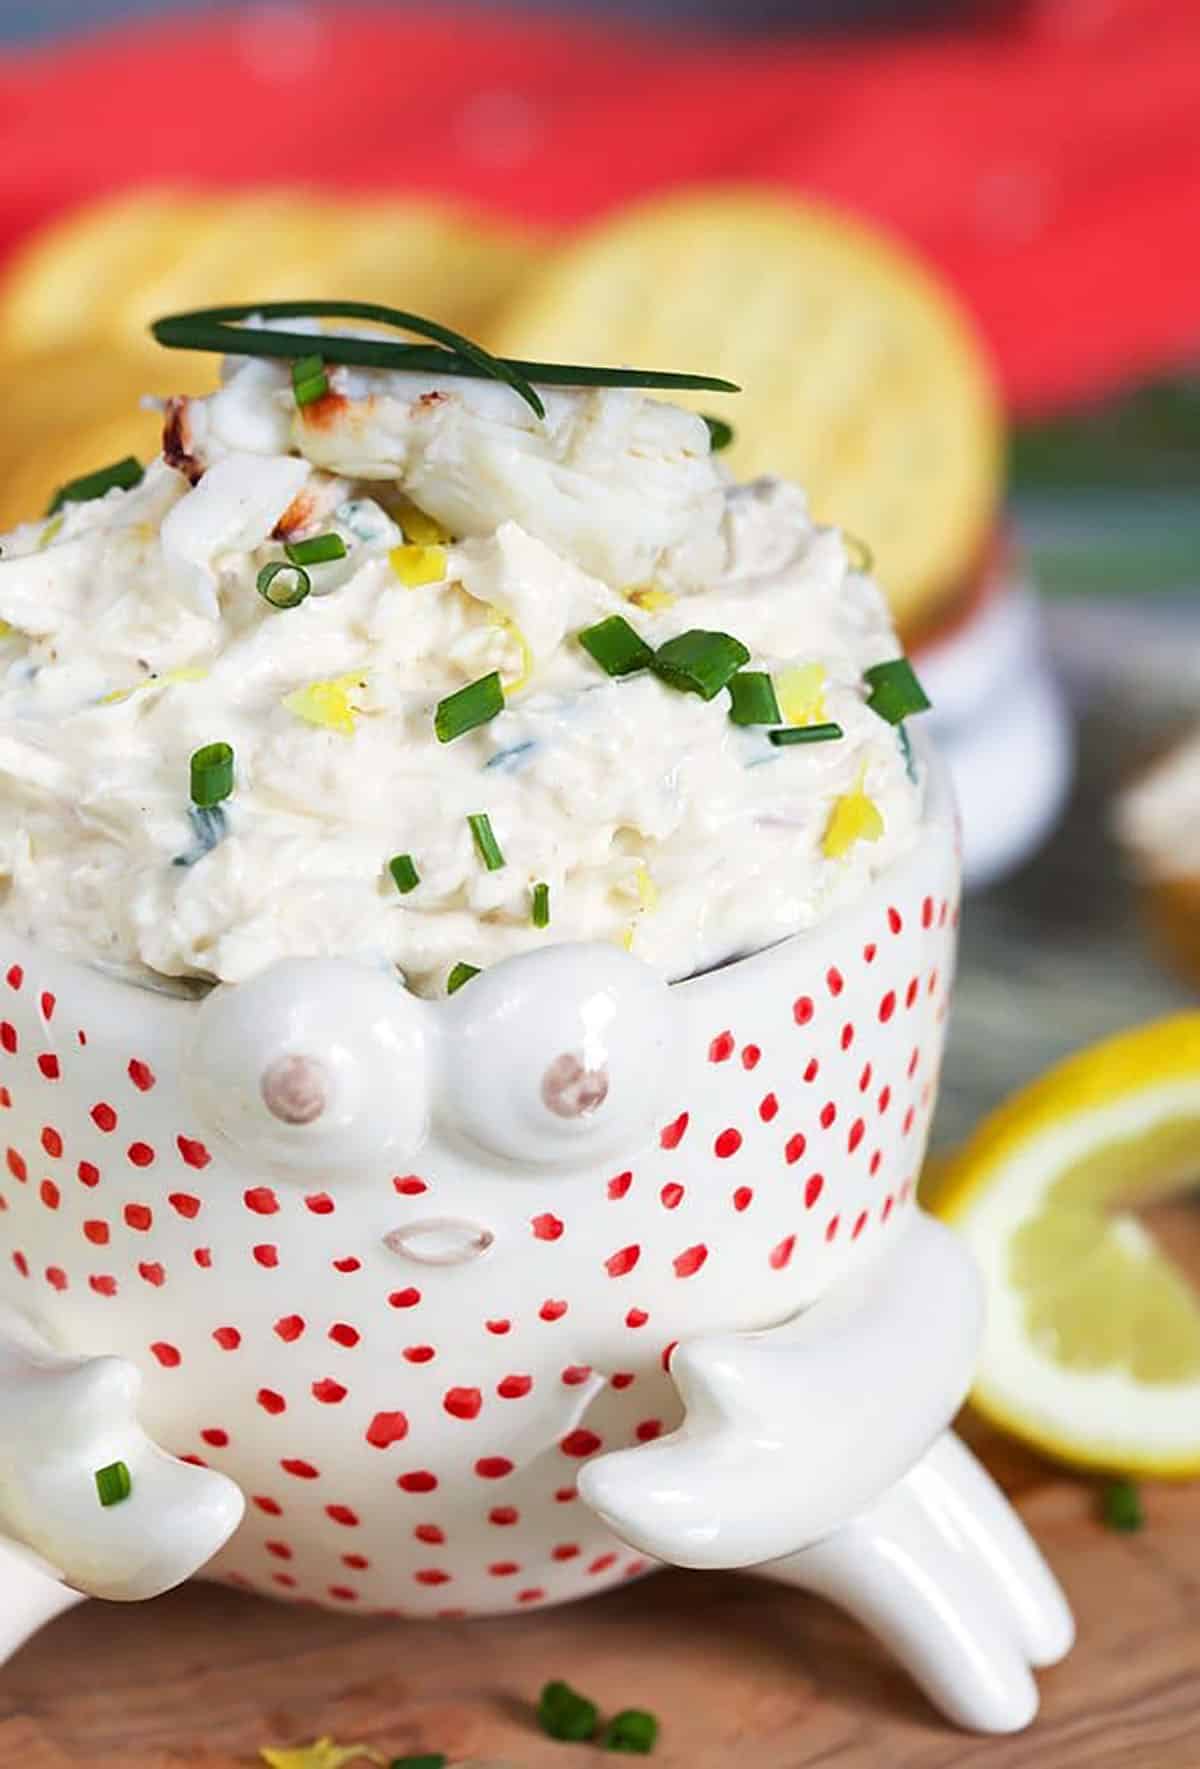 Crab dip in a bowl shaped like a white crab.